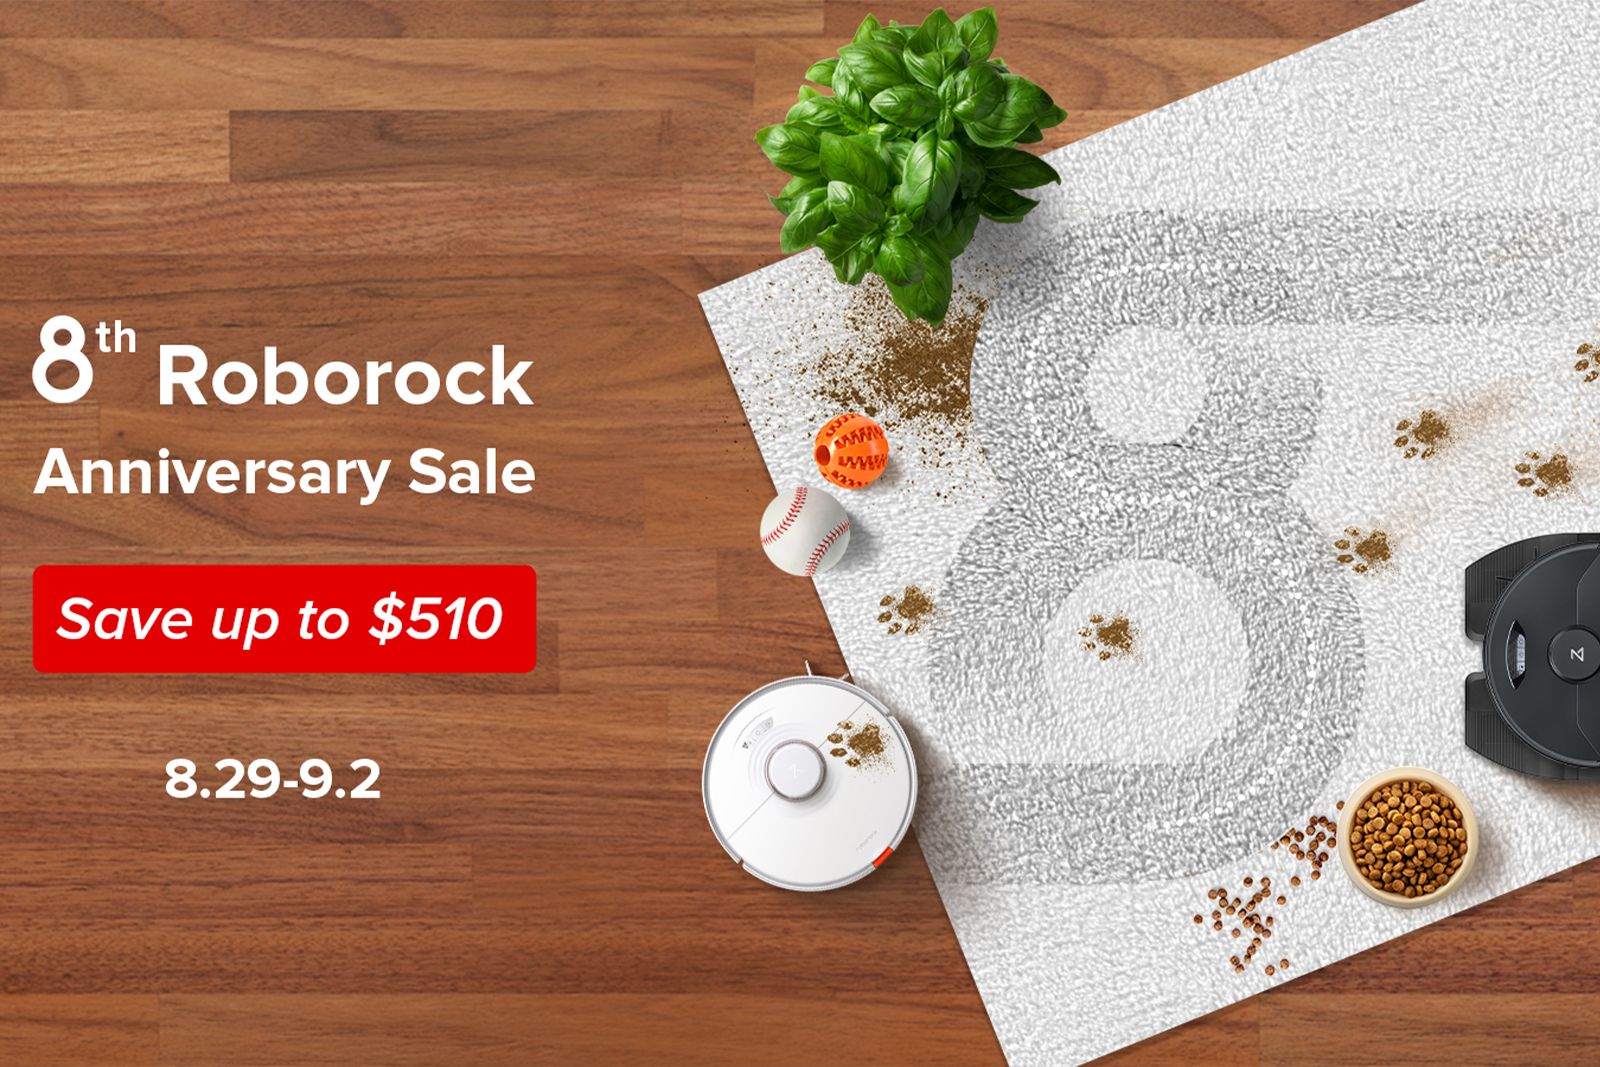 It’s Roborock’s 8th anniversary and it has some awesome deals on its robot vacuums photo 2